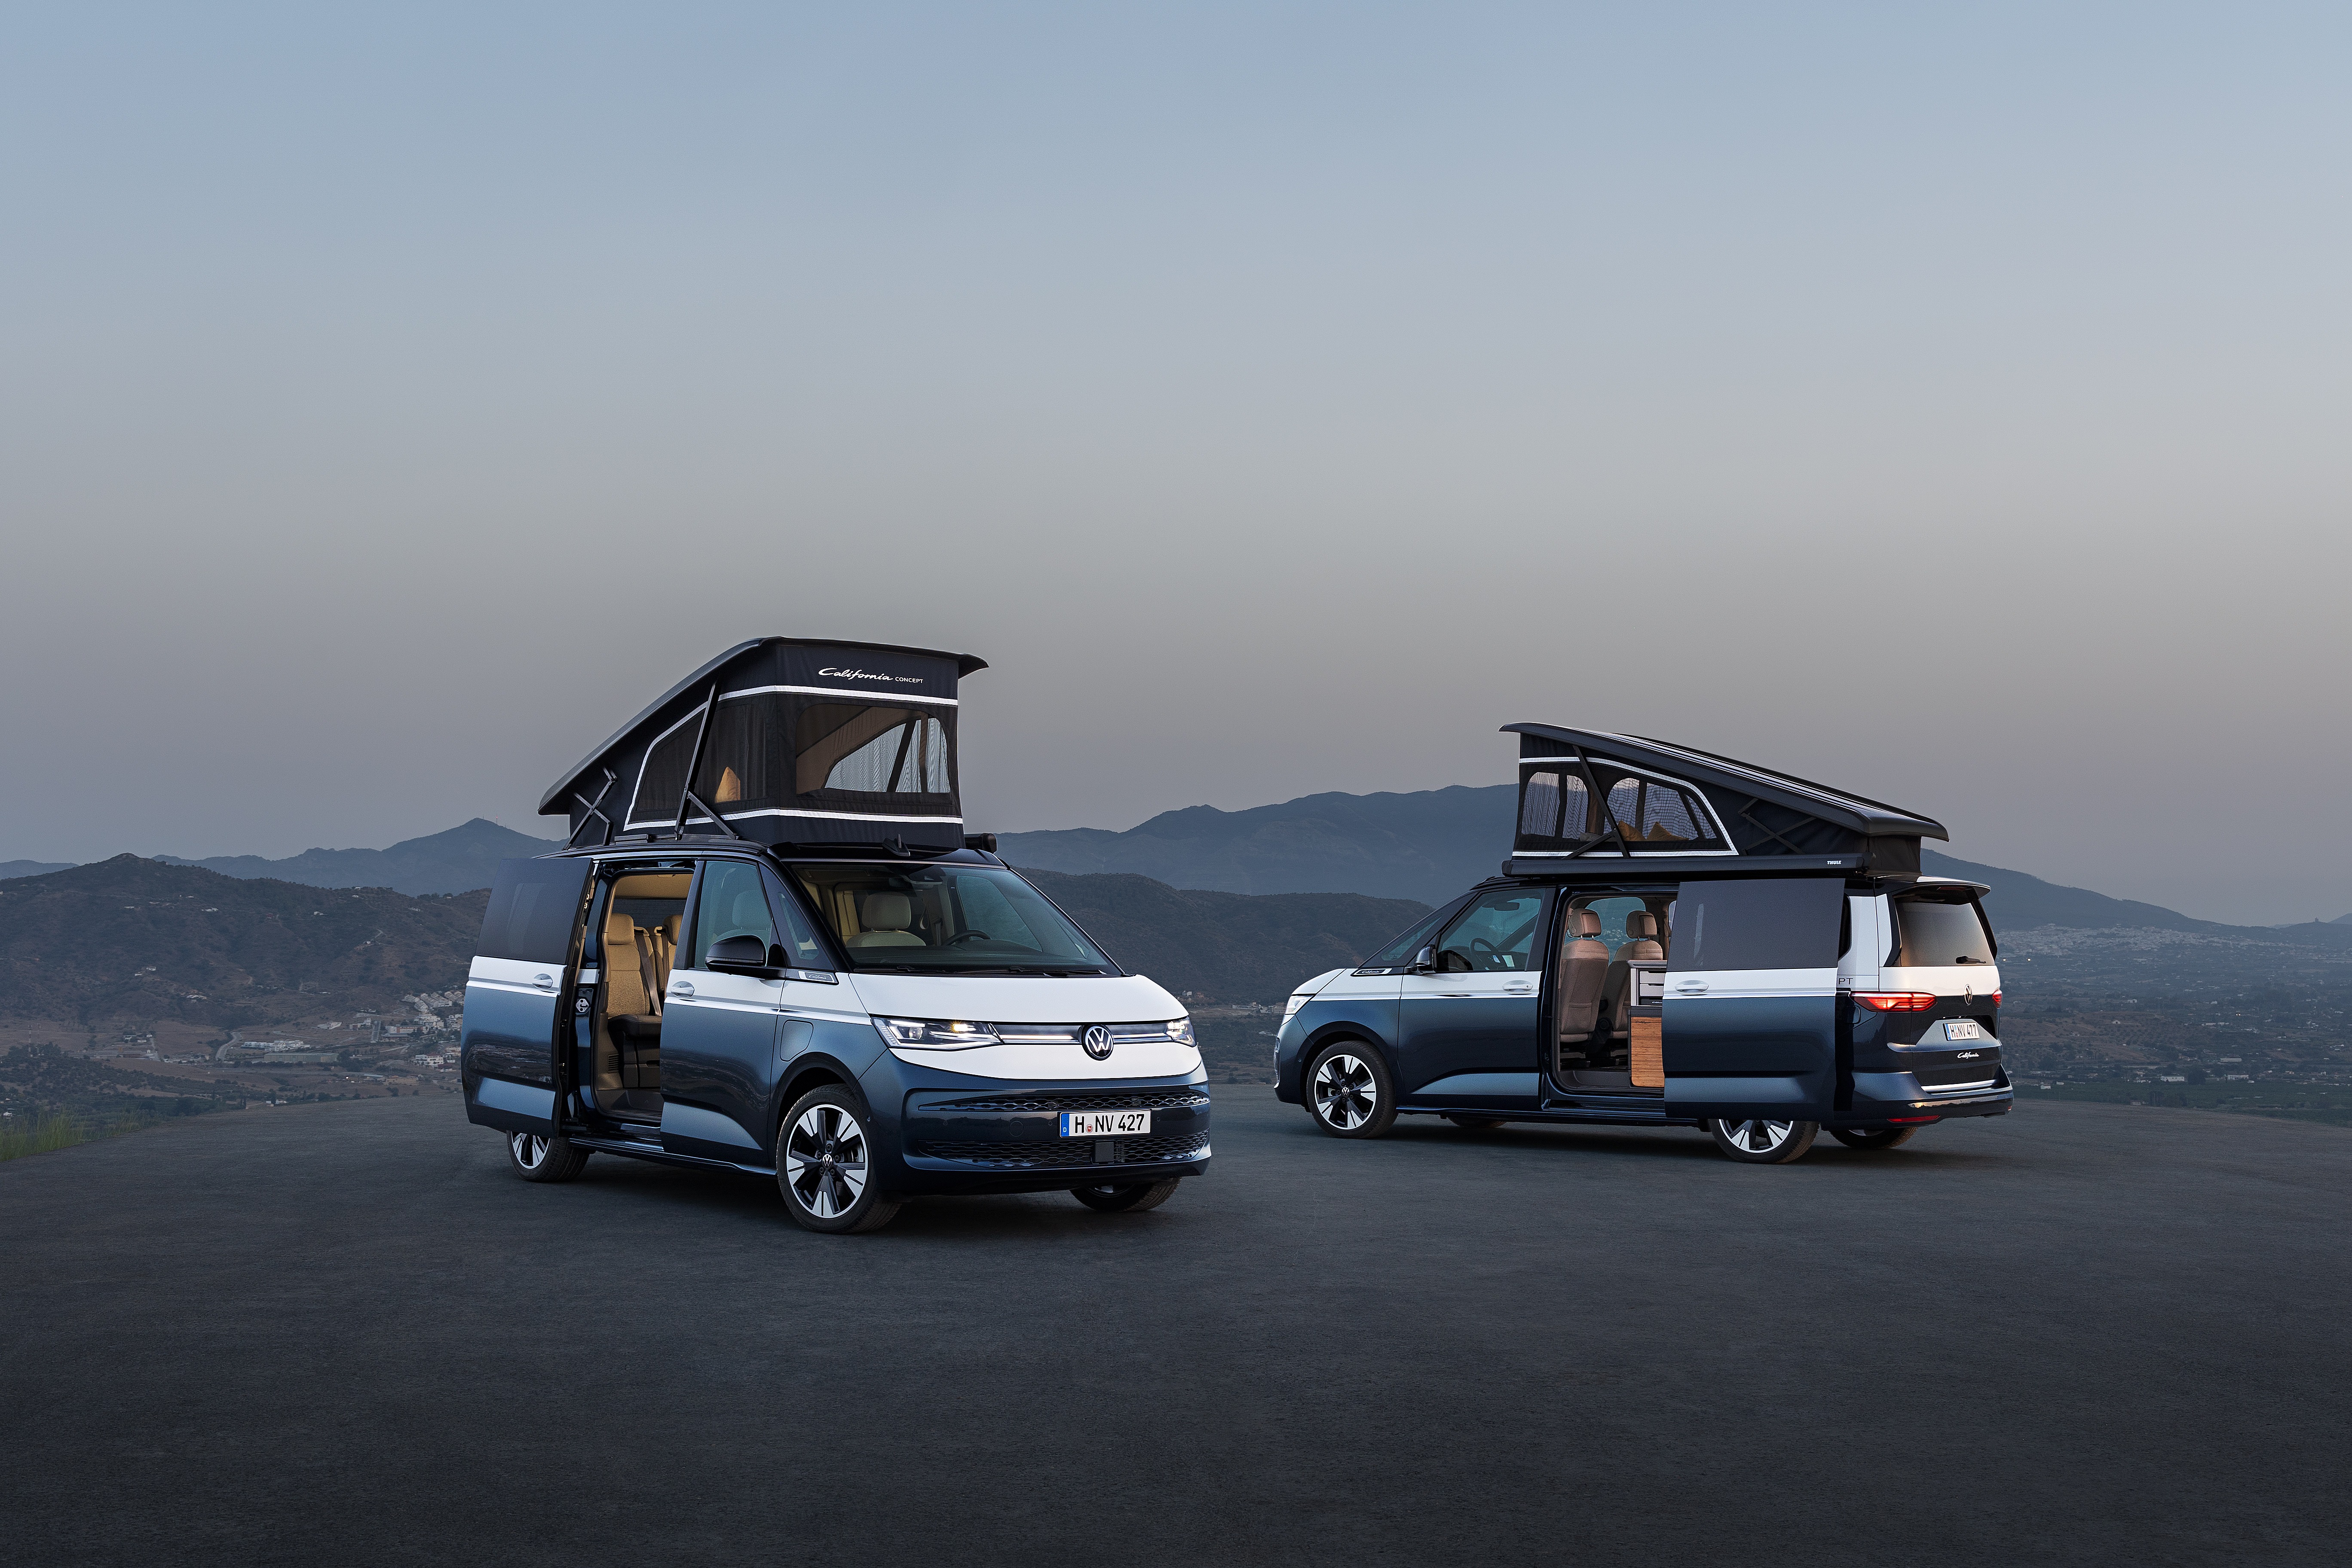 The world premiere of the new VW California concept